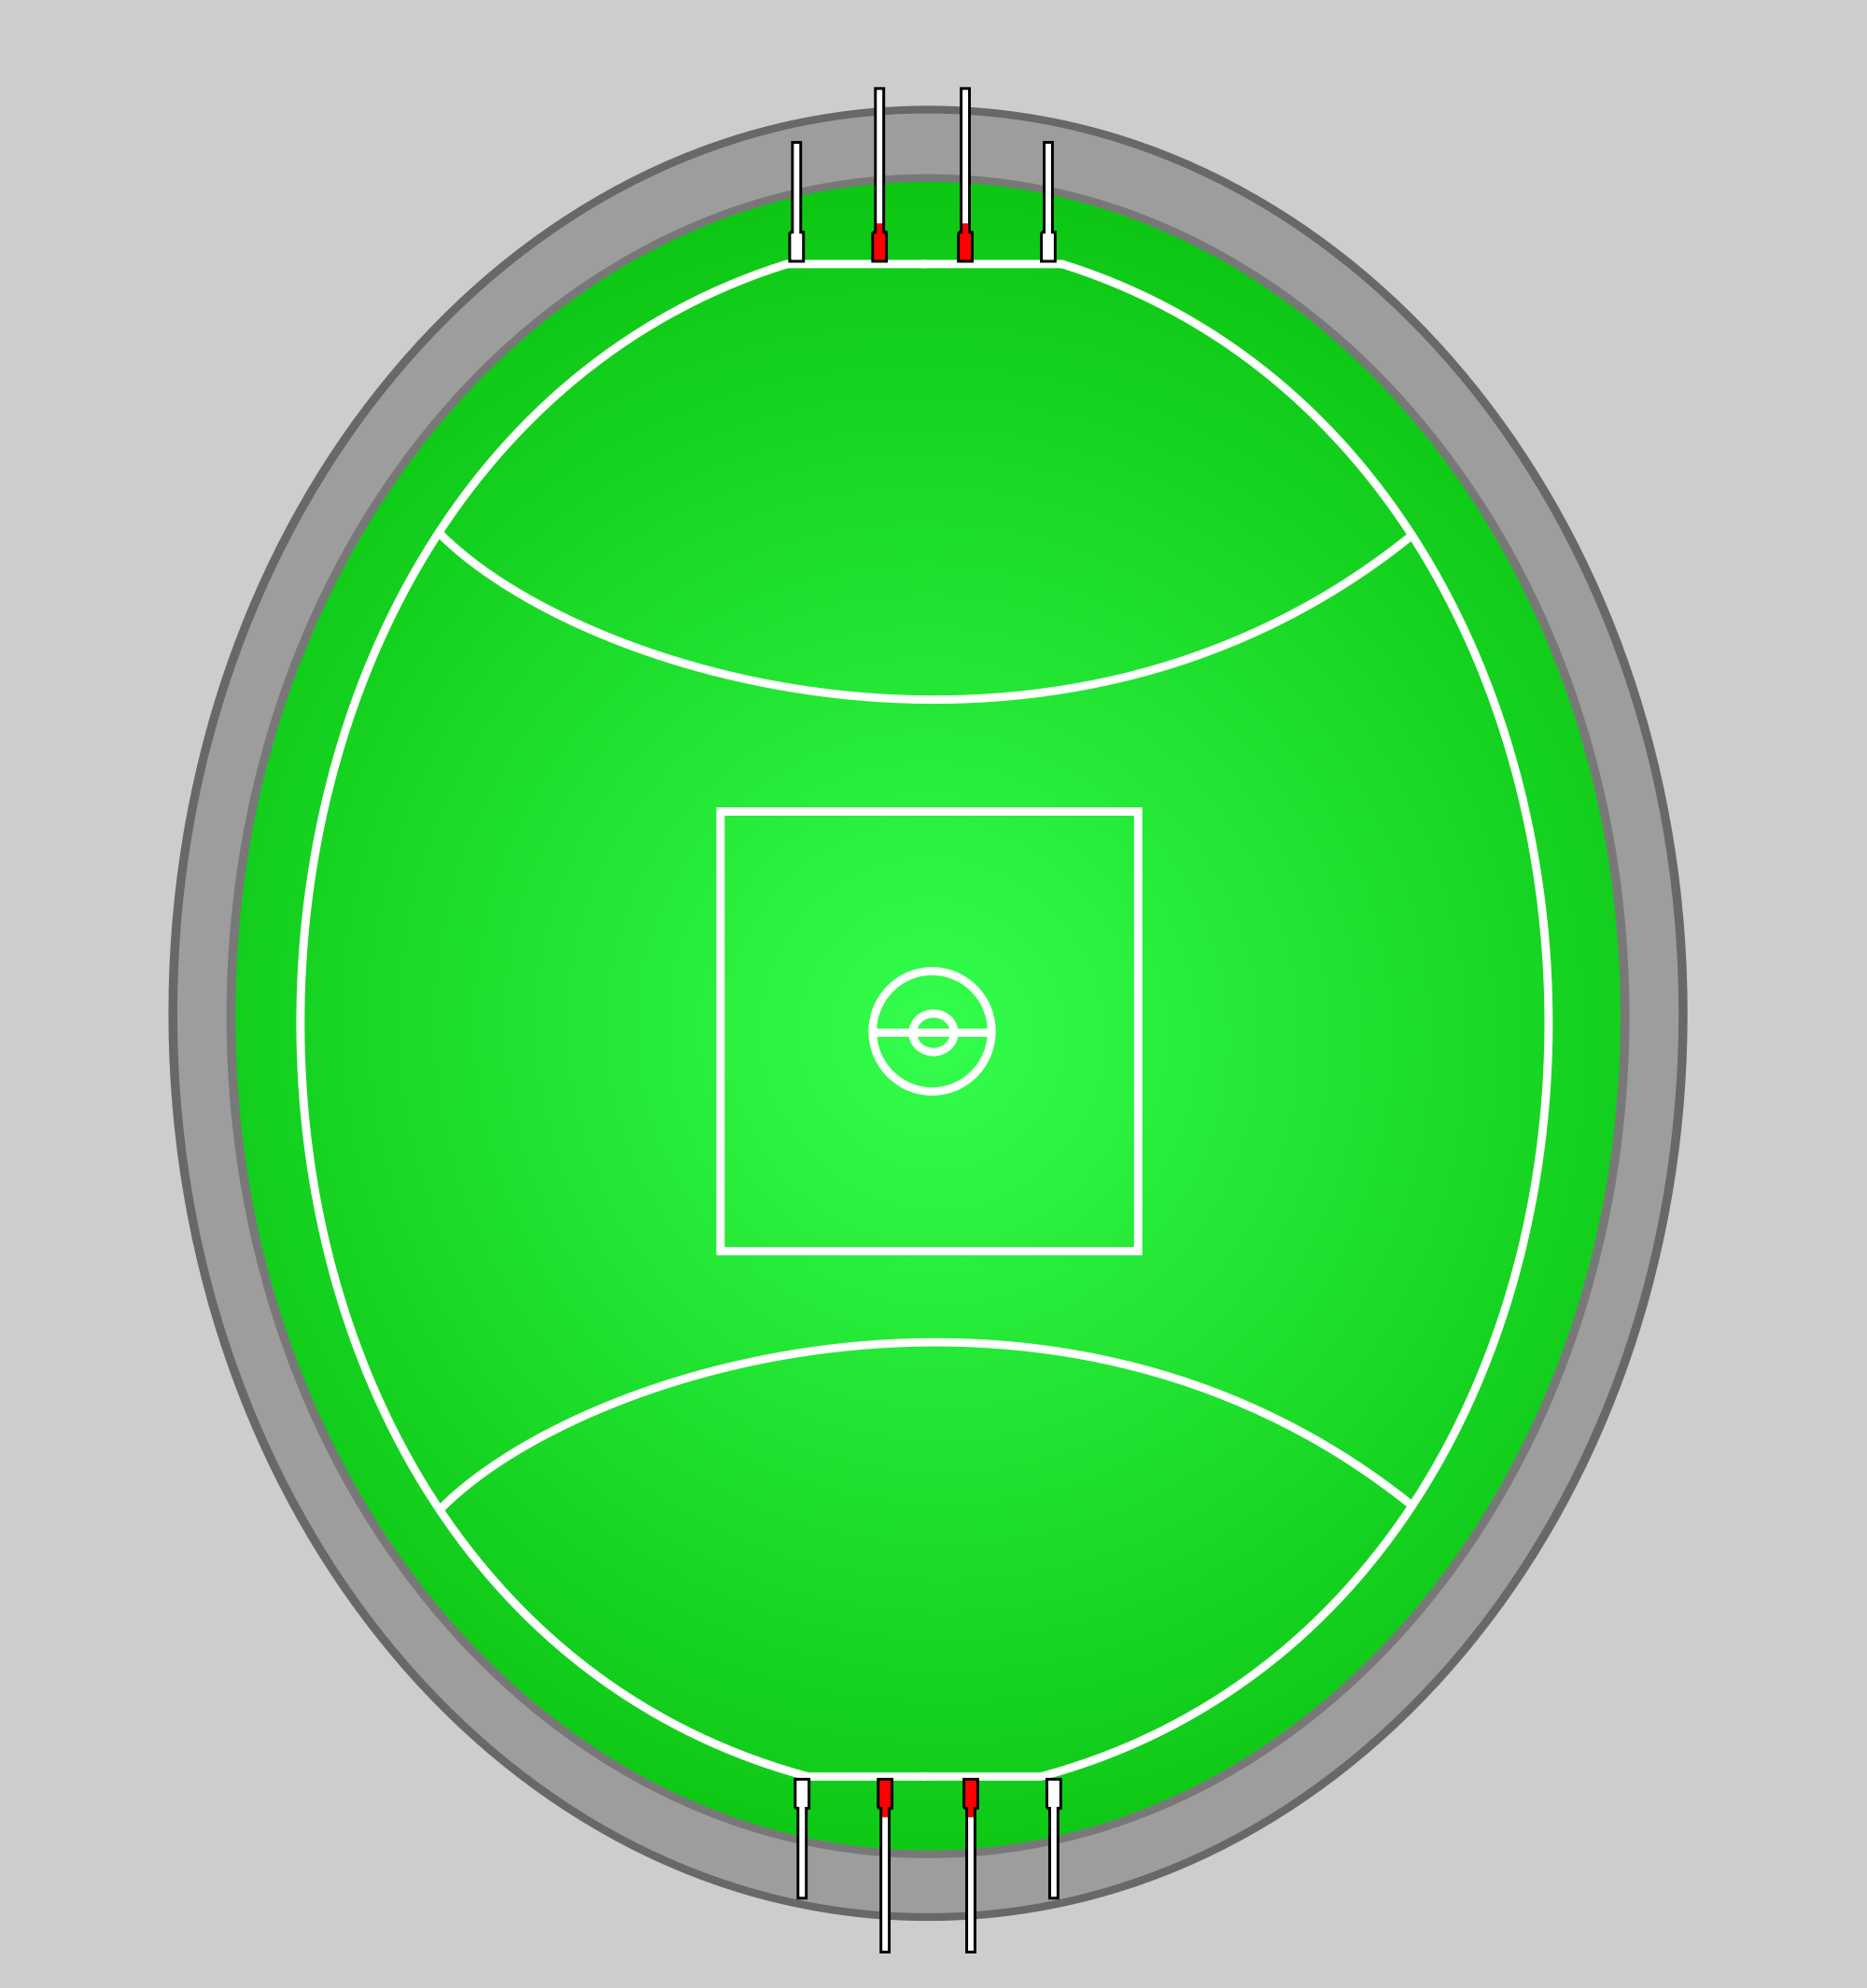 Pix For > Football Ground Diagram With Players